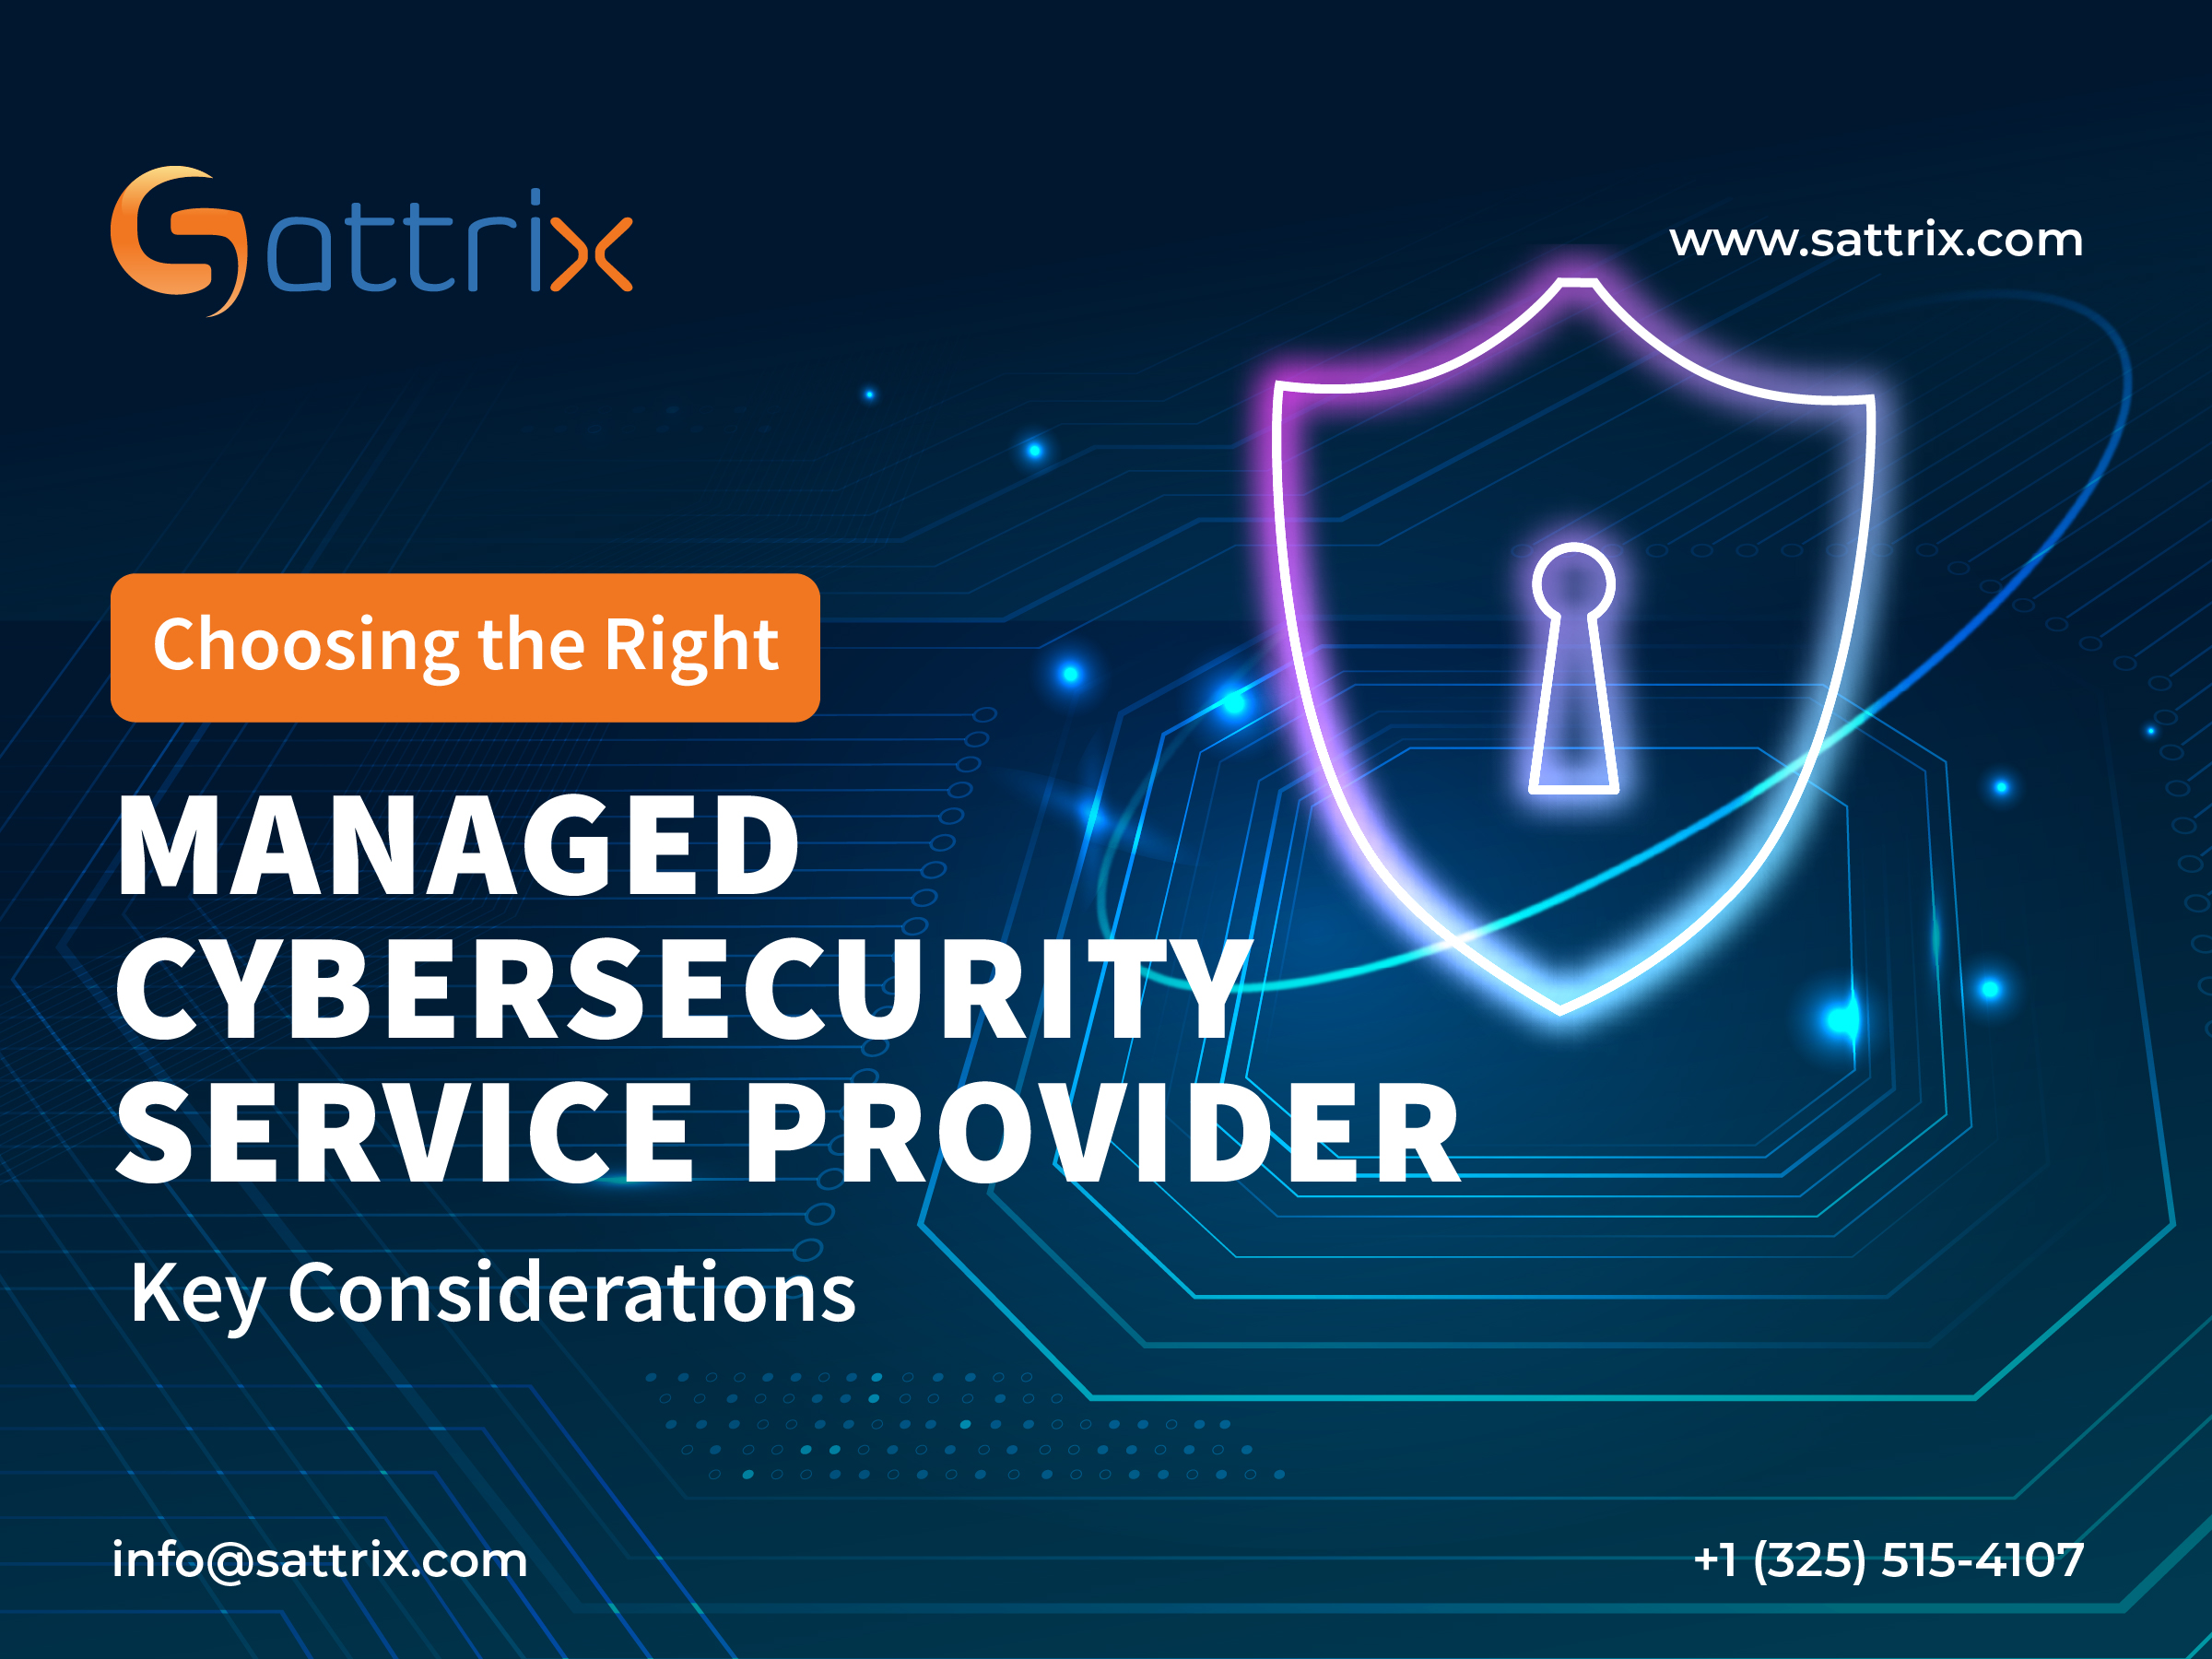 Managed Cybersecurity Service Providers: What You Need to Know to Make the Right Choice